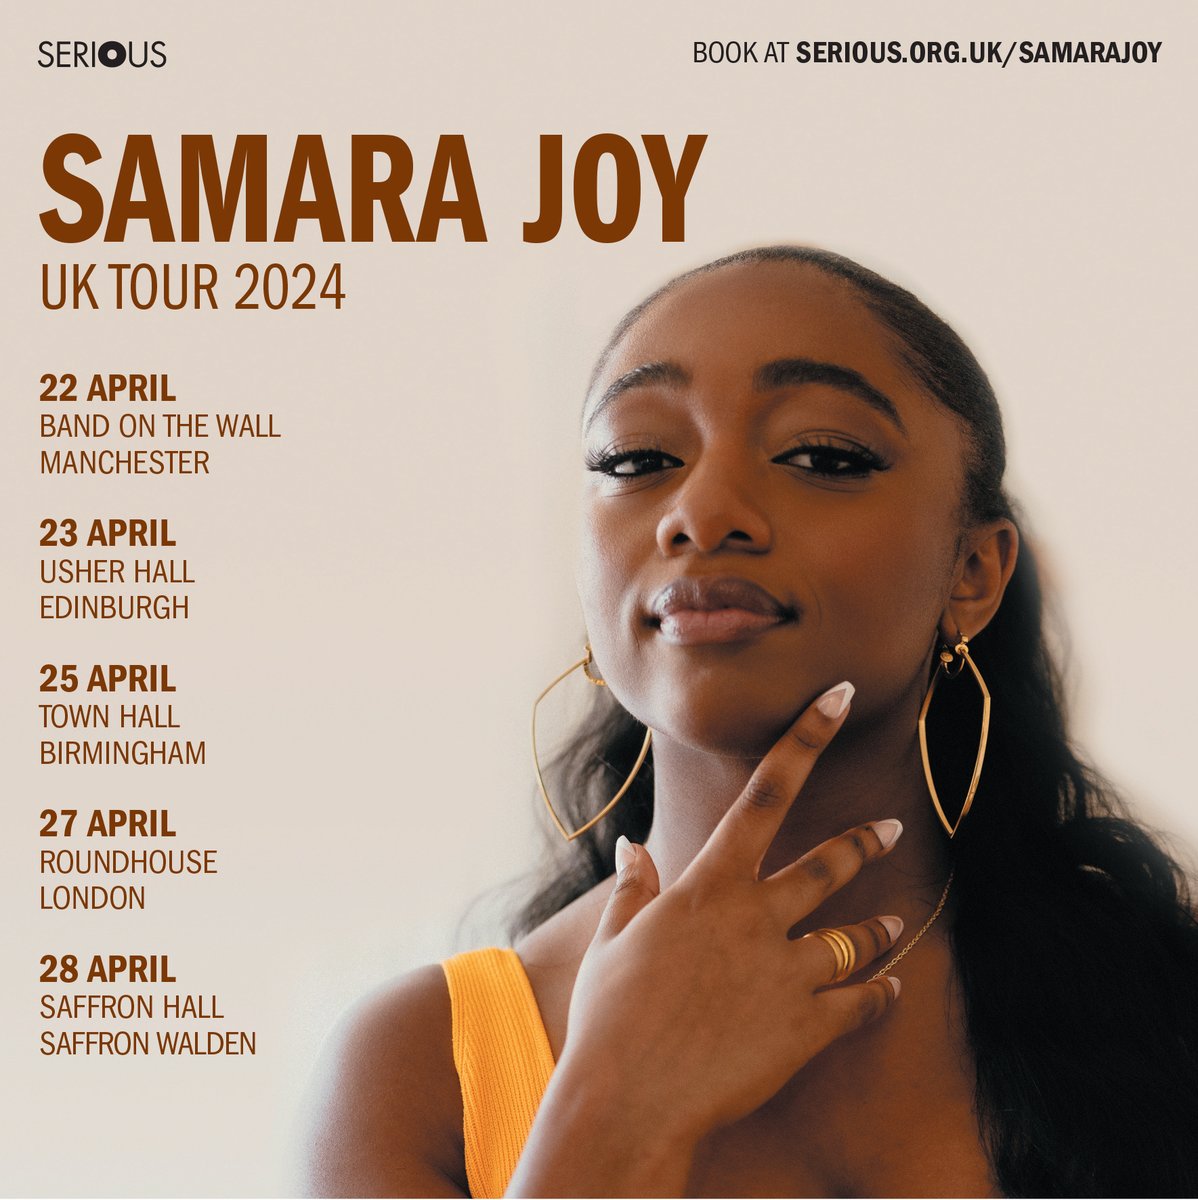 Don’t want to wait until November to get your jazz festival fix? @SamaraJoy99 returns in 2024 for her first ever UK tour! 💫 After selling out her EFG London Jazz Festival show this year, don't miss out on securing your ticket! Book now at serious.org.uk/samarajoy